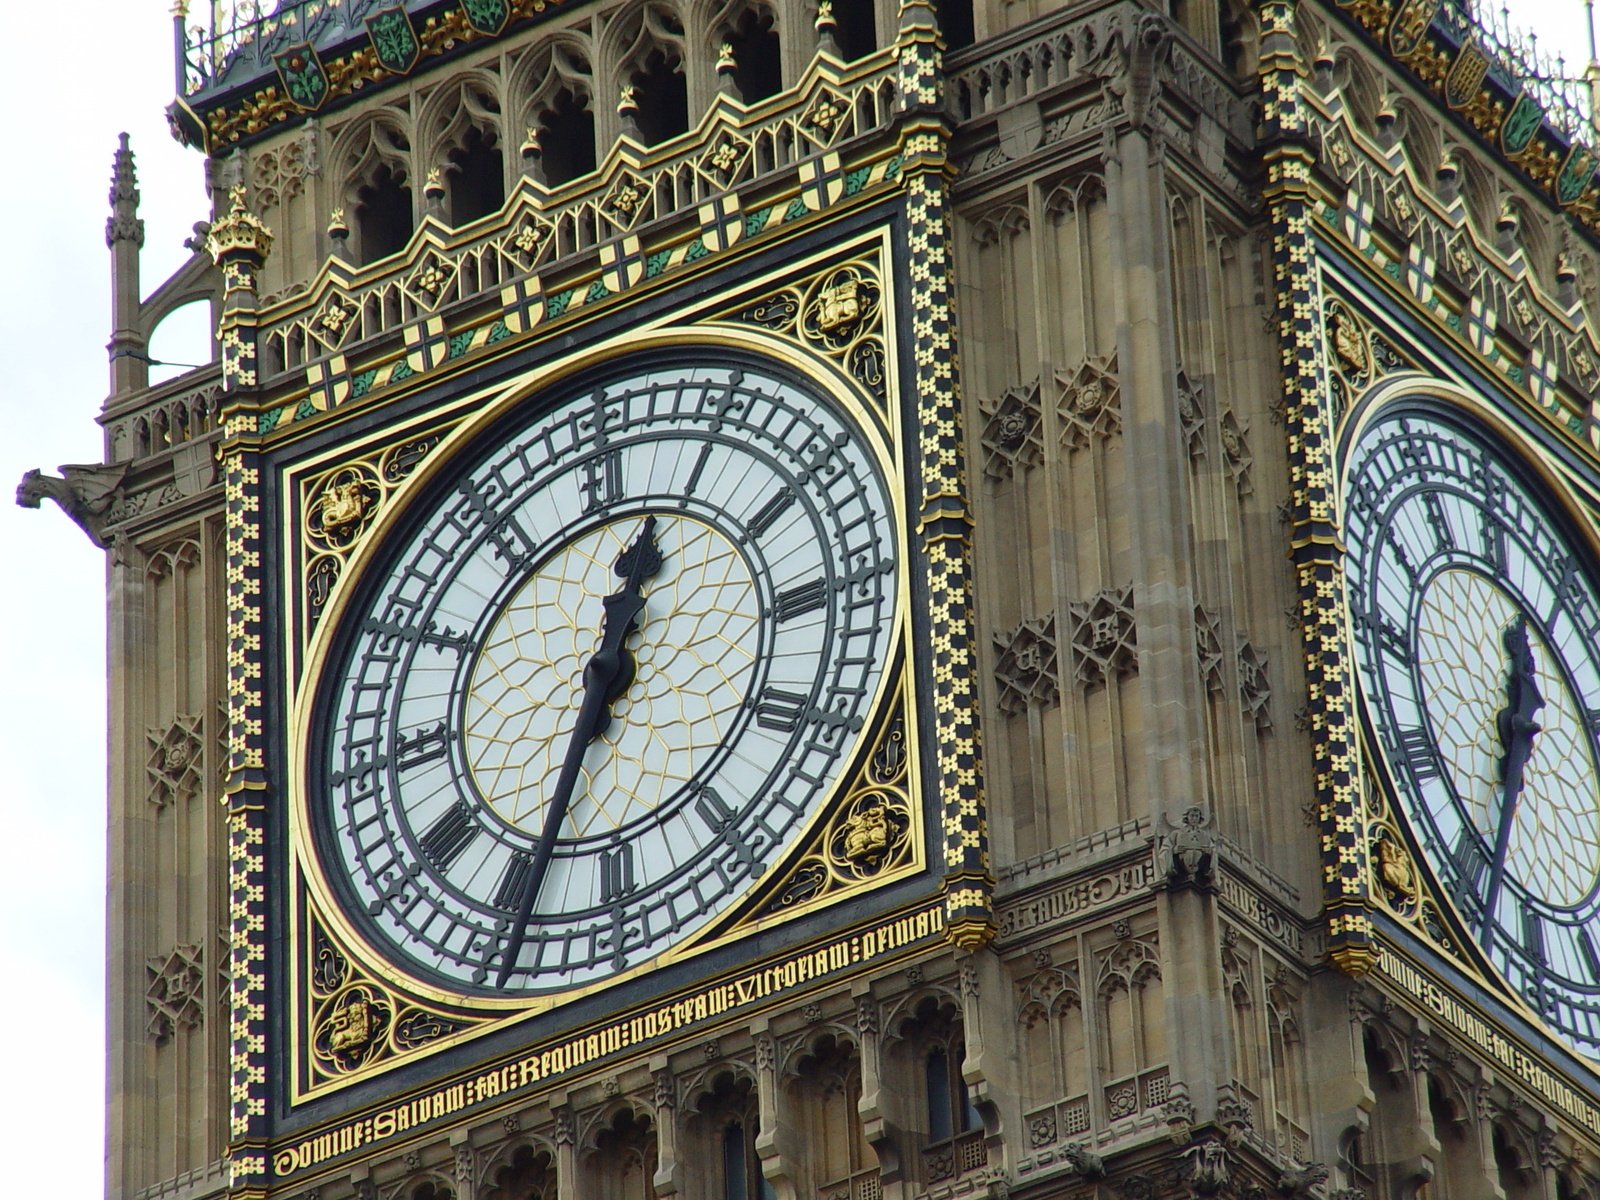 the big ben clock tower towering over the city of london